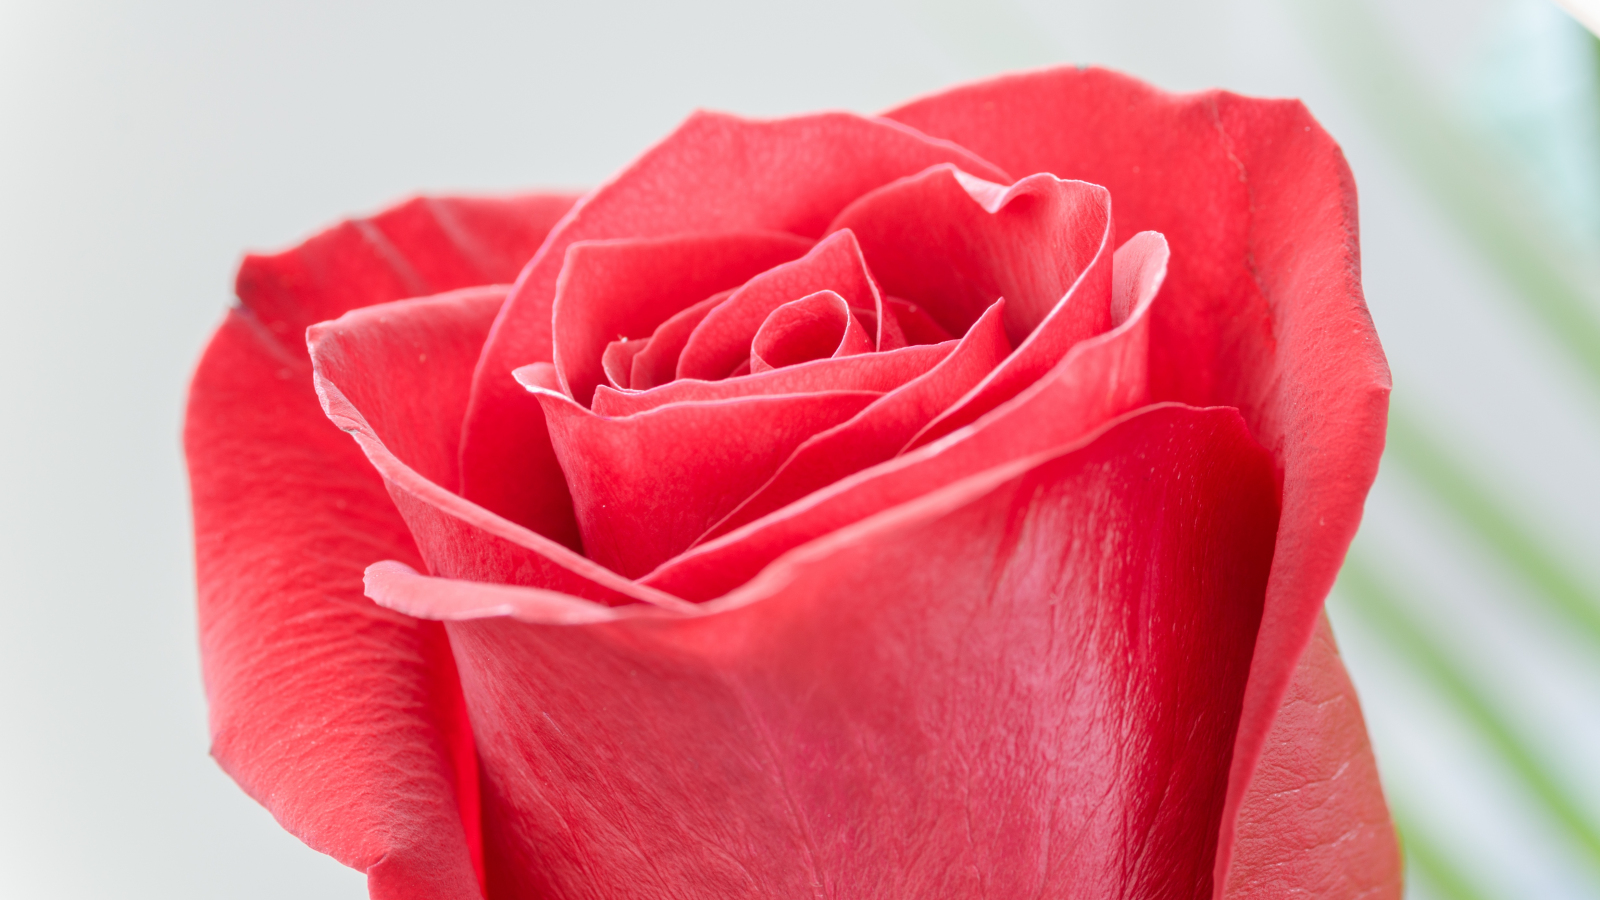 Download 1600x900 Wallpaper Red Rose Bud, Flower, Close Up, 4k, Widescreen  16:9, Widescreen, 1600x900 Hd Image, Background, 25906